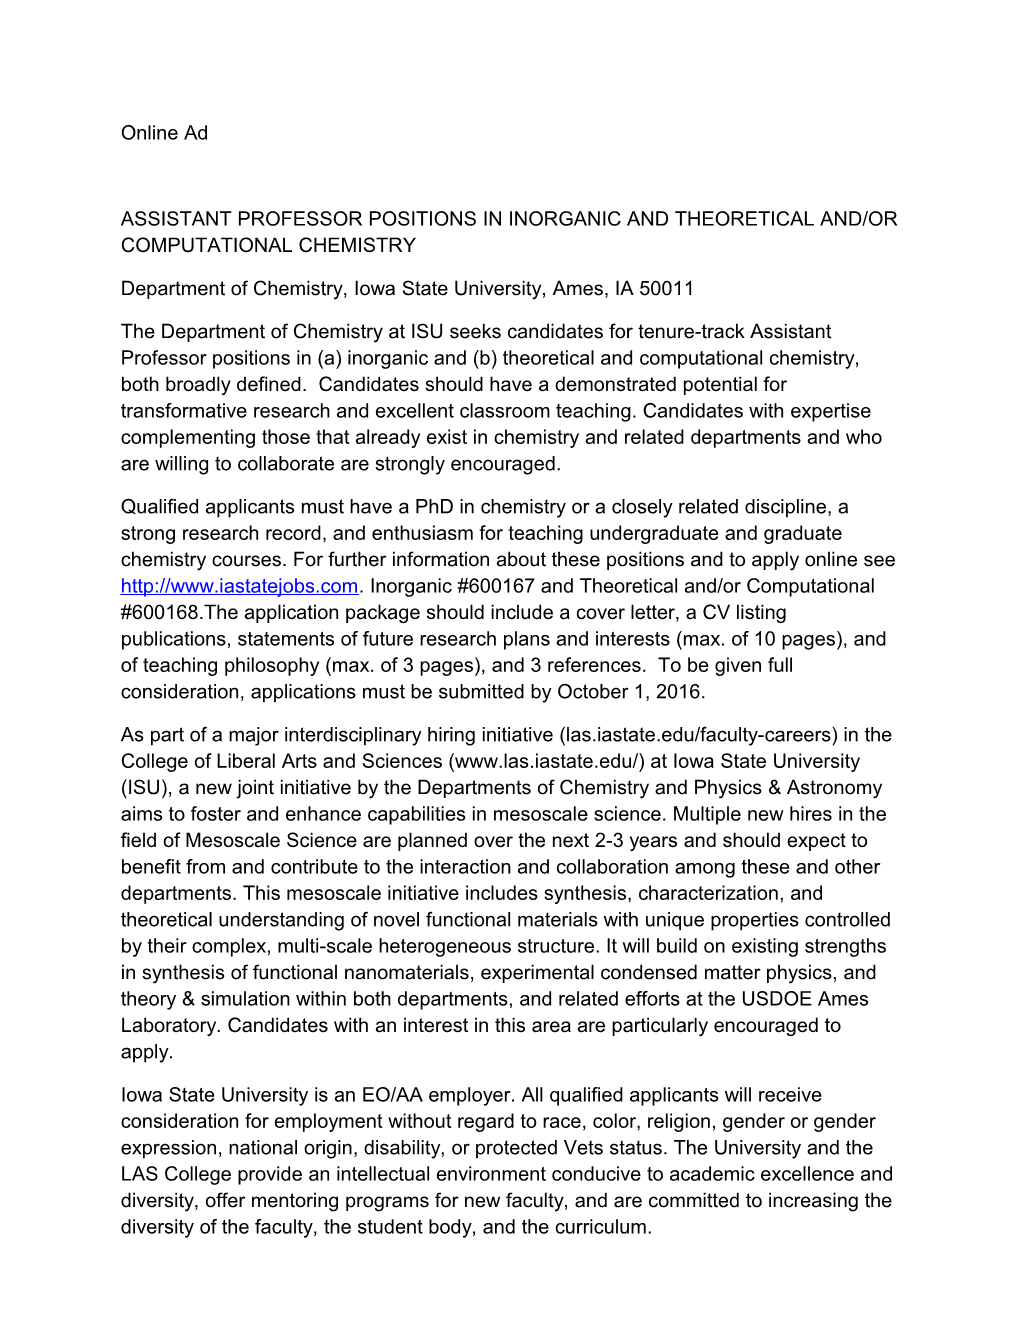 Assistant Professor Positions in Inorganic and Theoretical And/Or Computational Chemistry